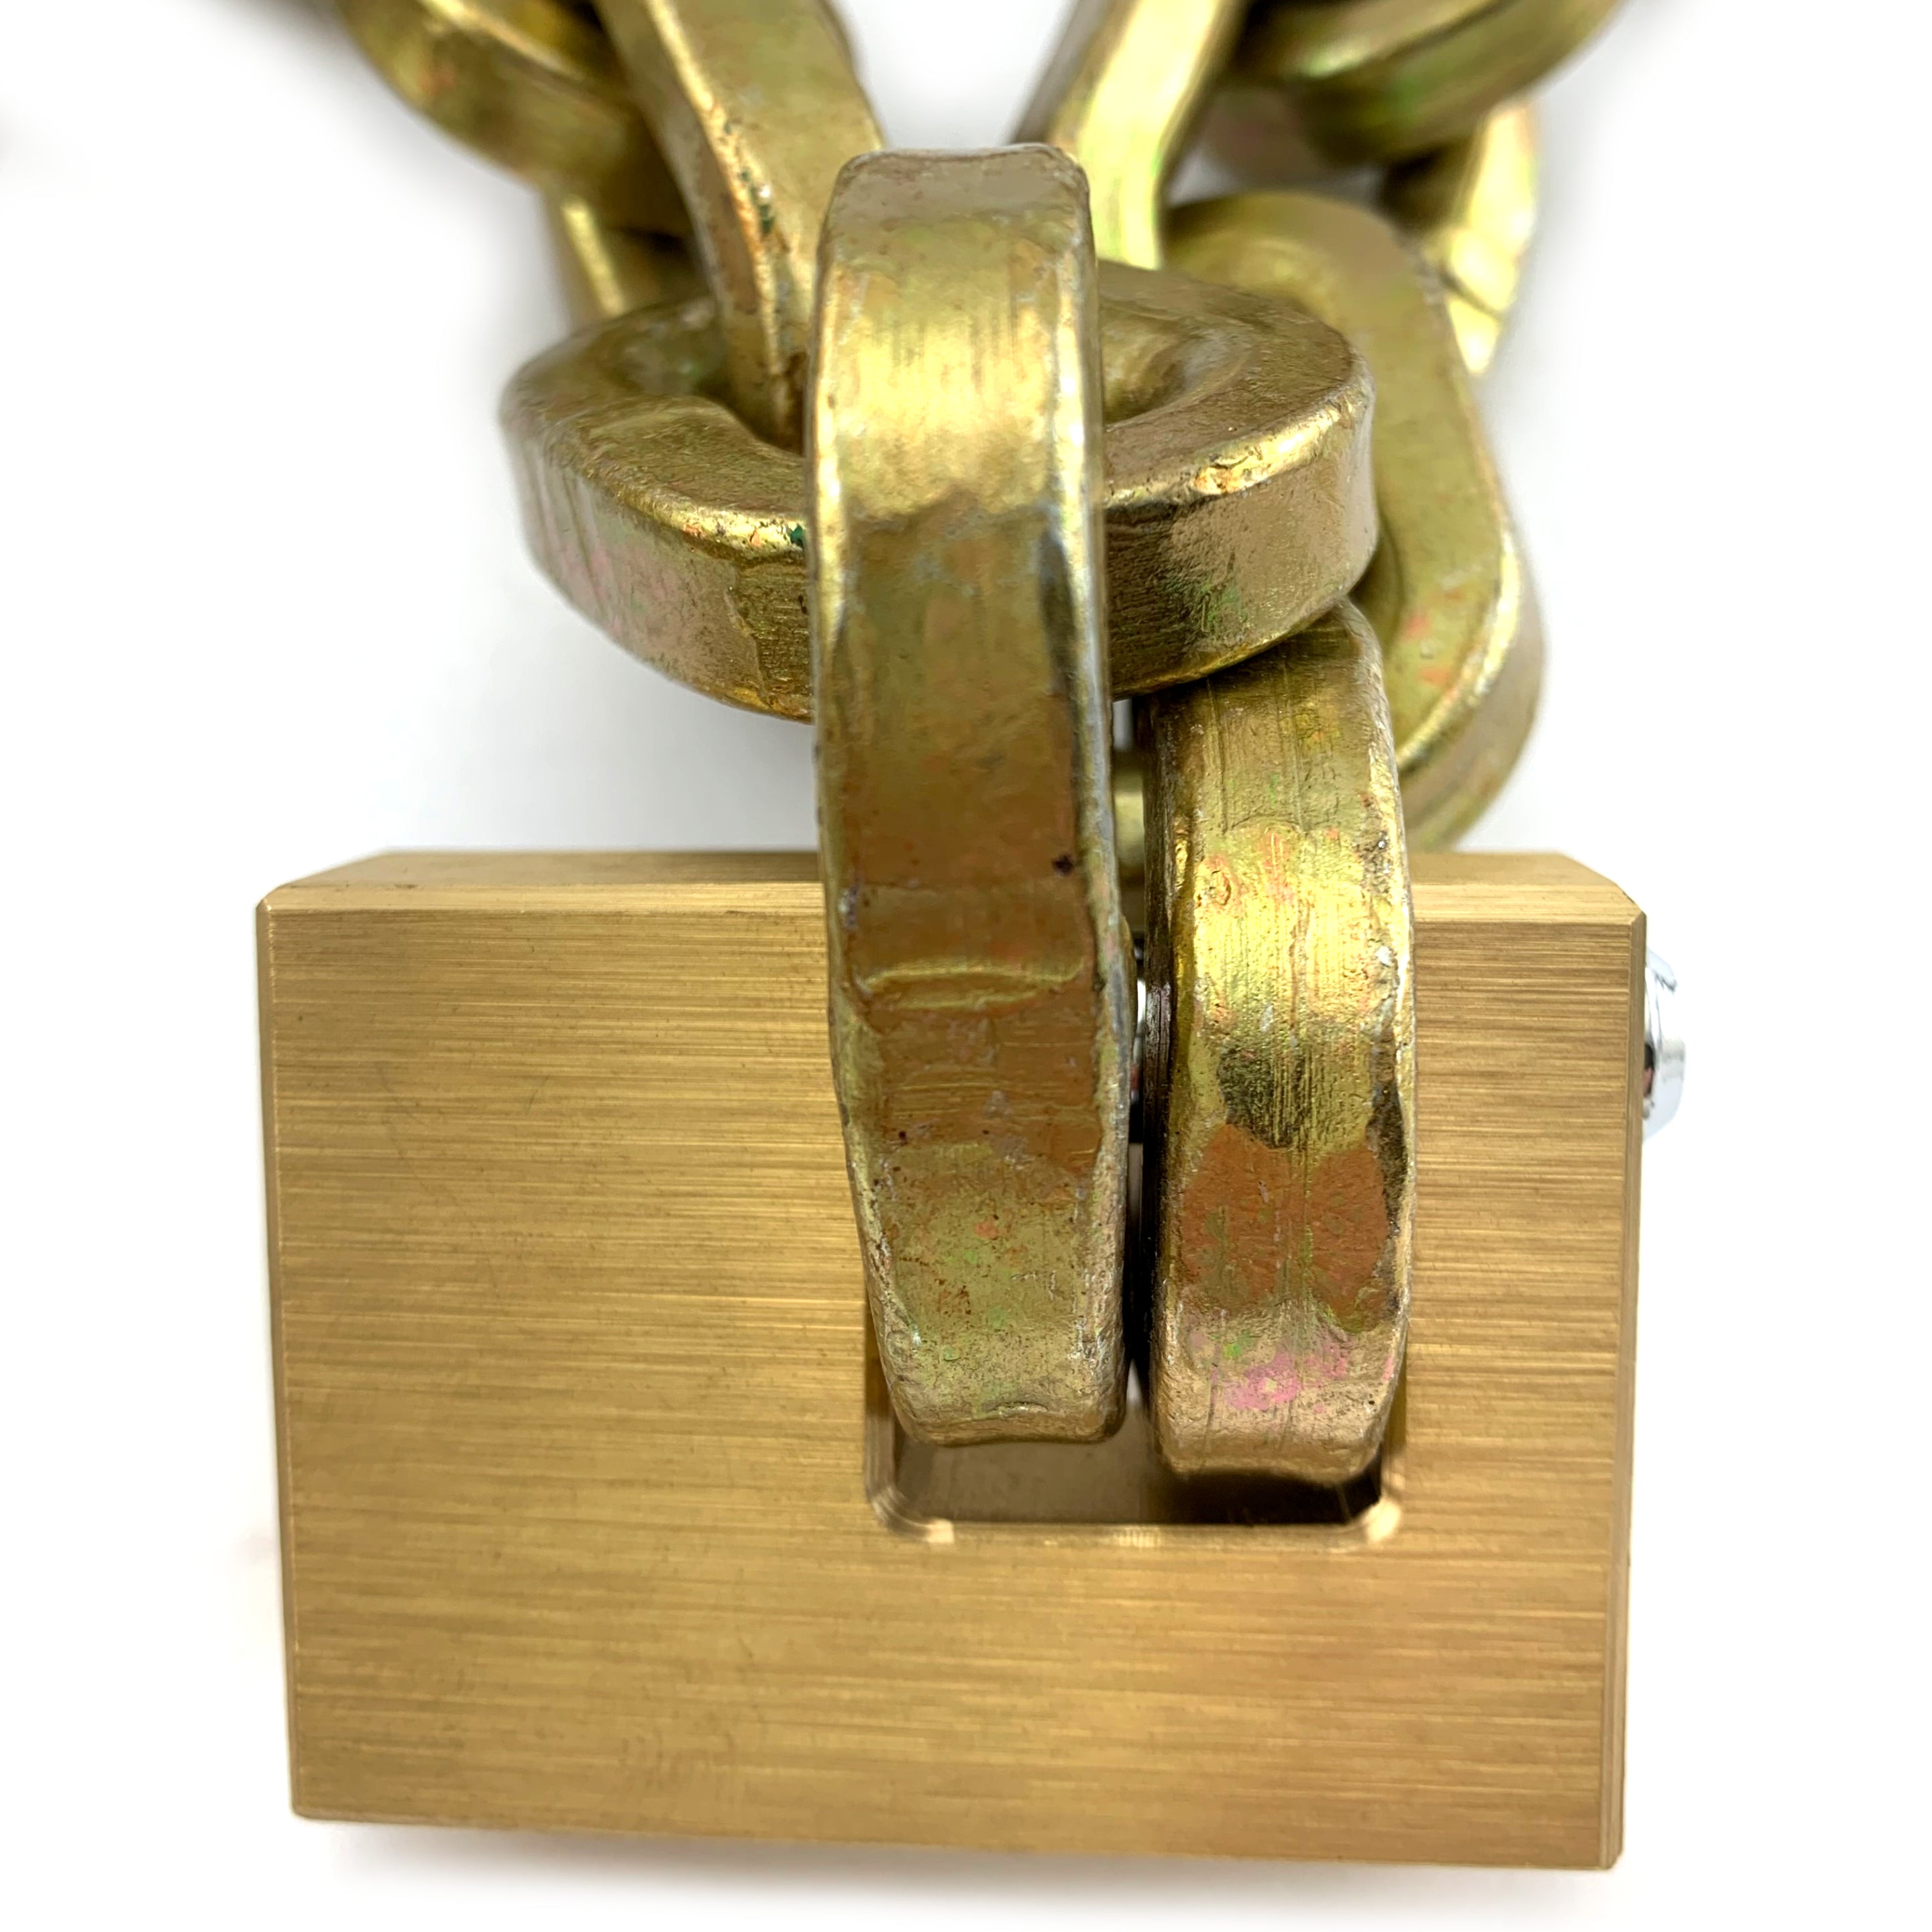 Monoblock padlock with Double-hardened premium square security chain, size: 10.5mm, order by the metre. Australia.